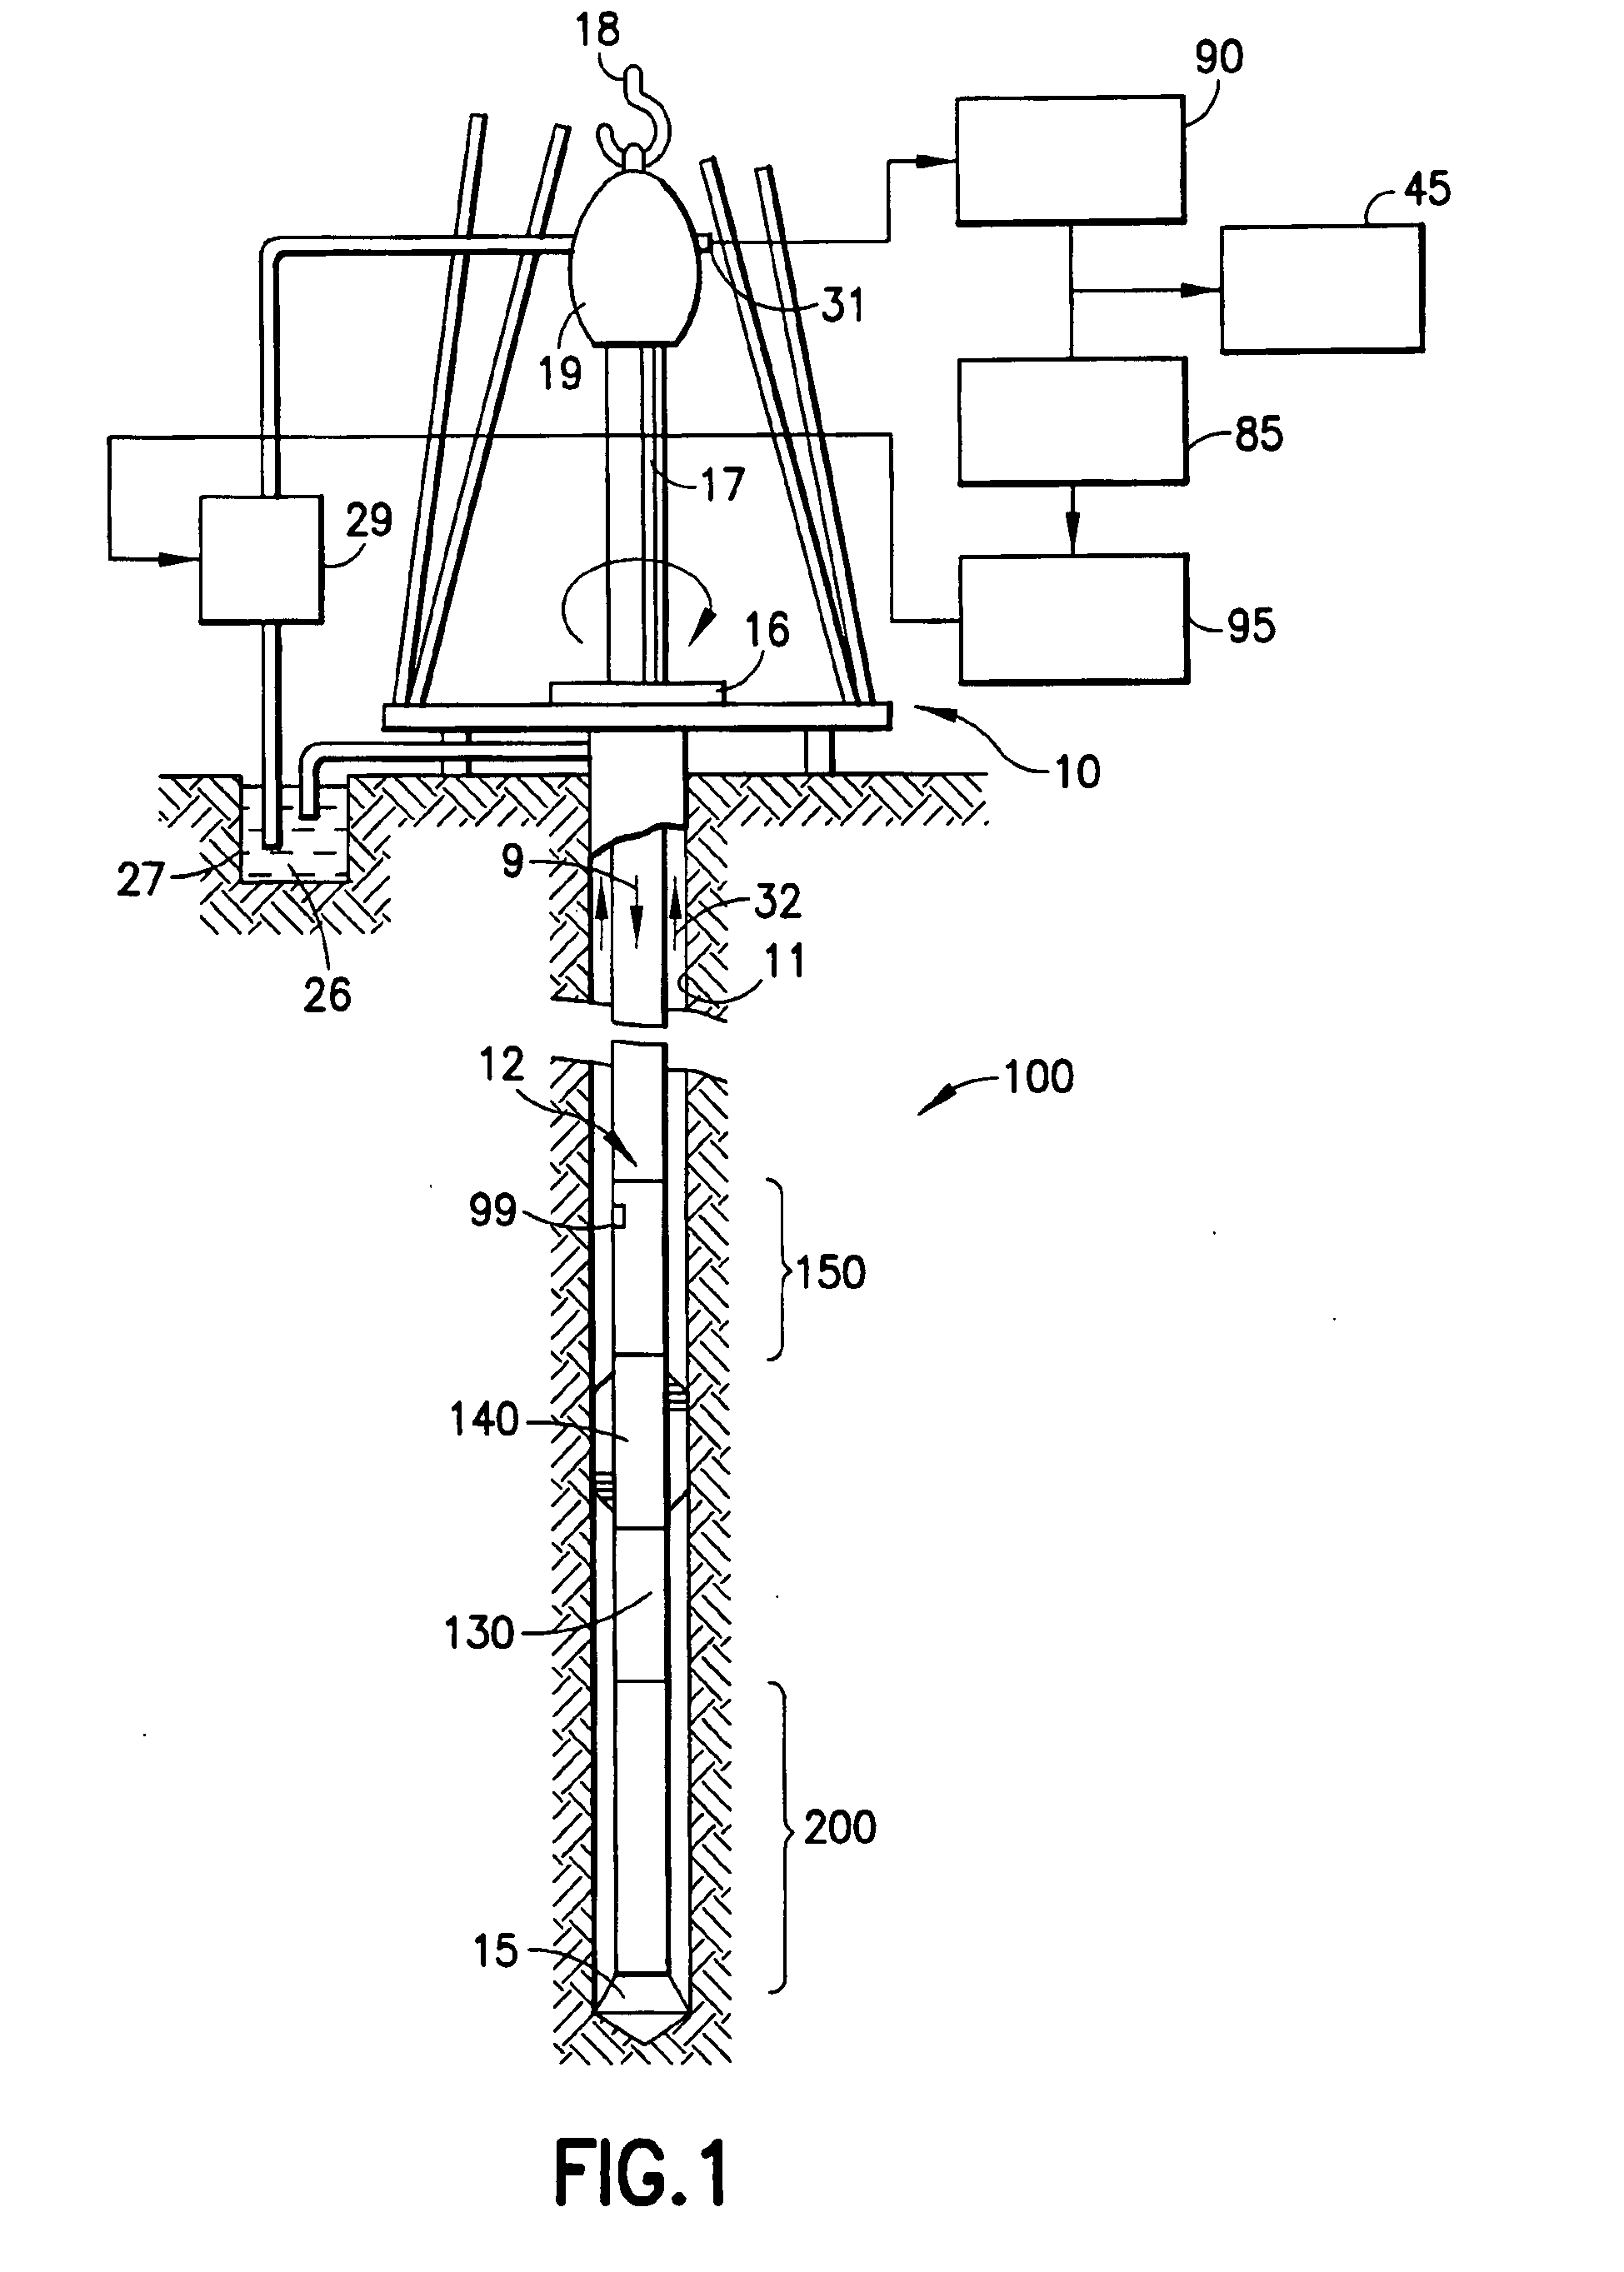 Downhole measurement of substances in formations while drilling